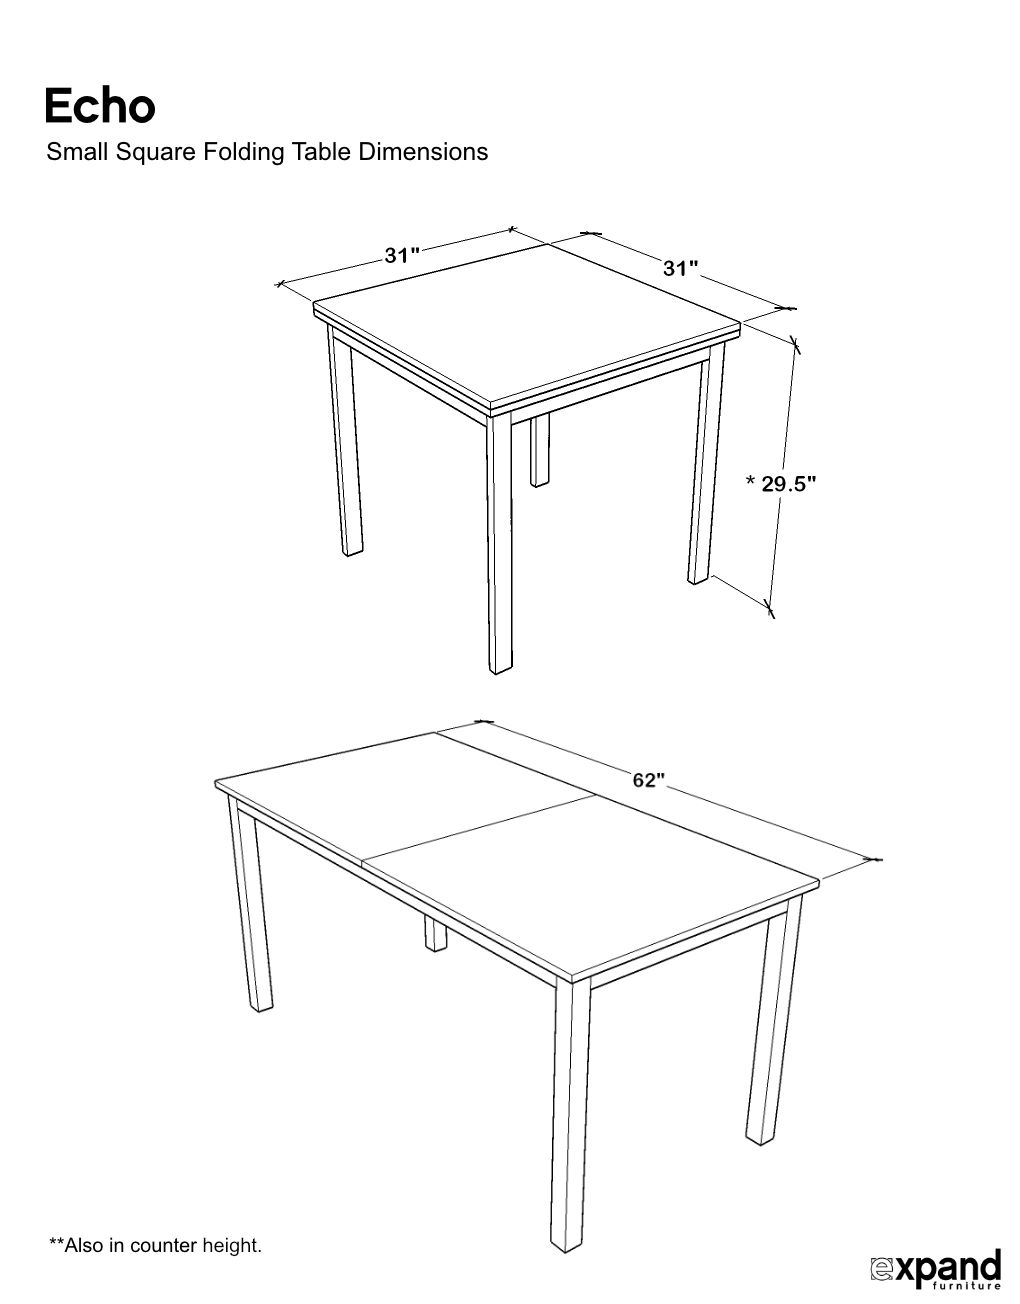 Echo Small Square Folding Kitchen Table Expand Furniture Folding Tables Smarter Wall Beds Space Savers